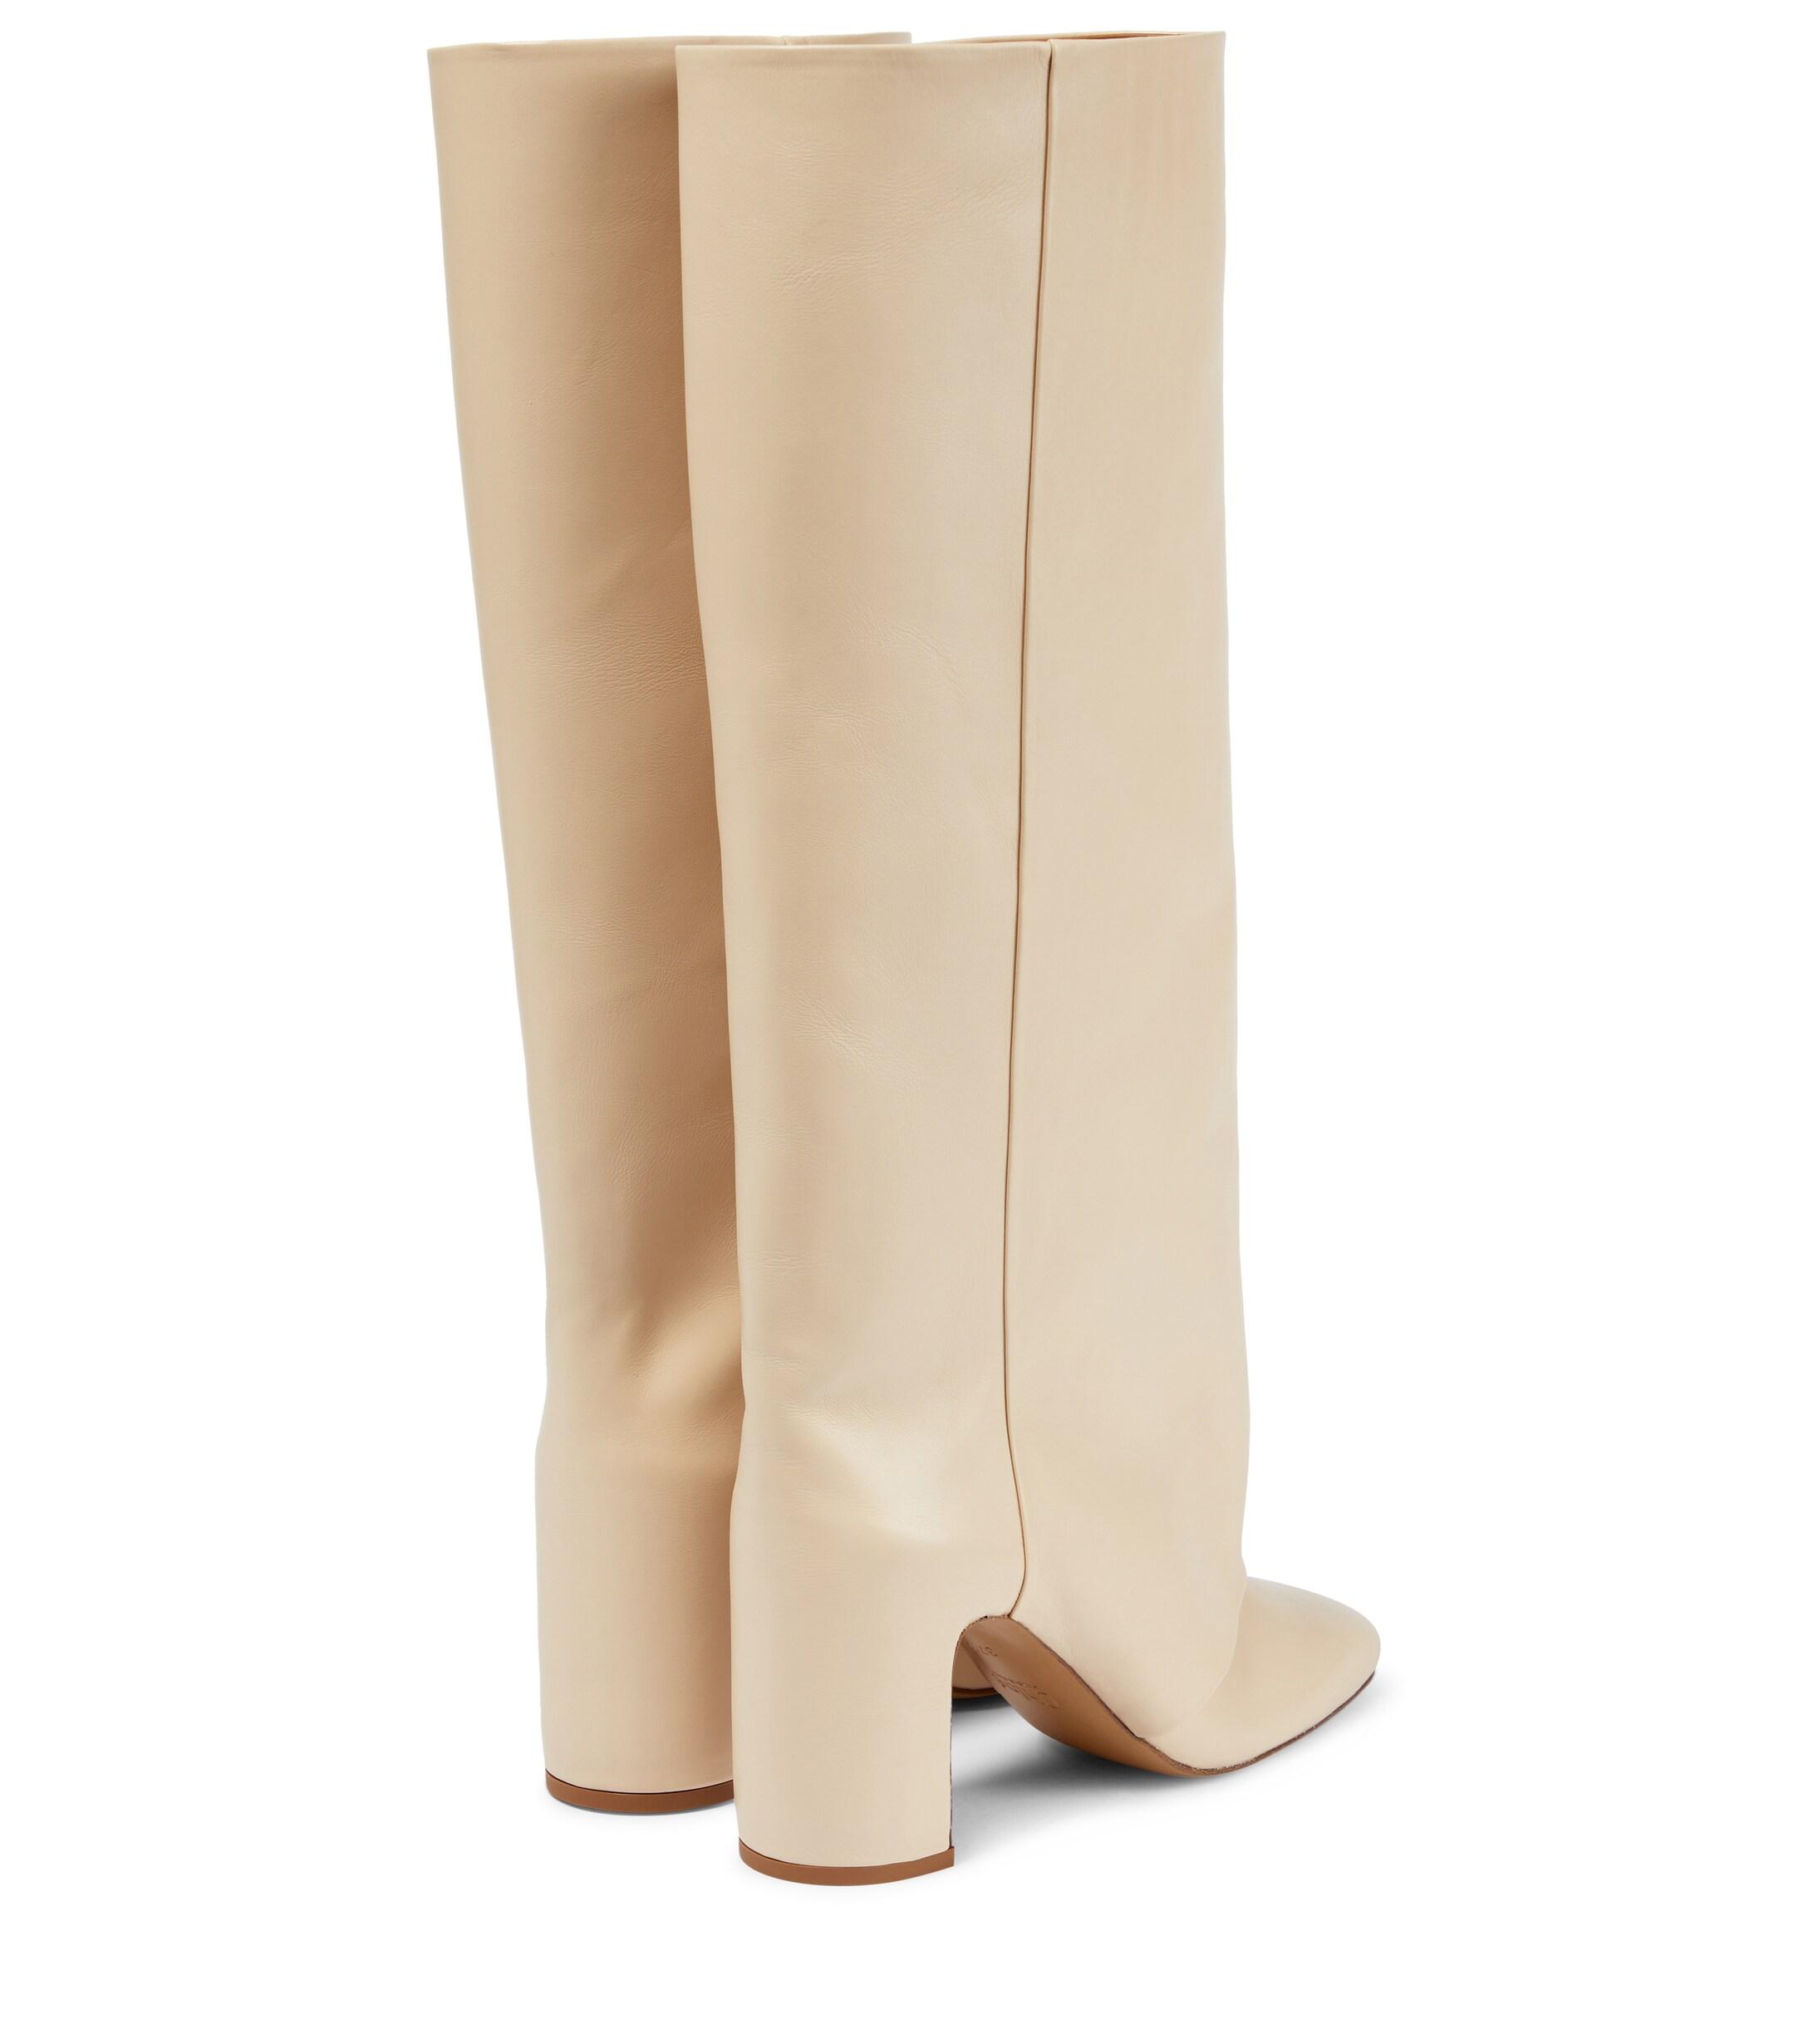 Chloé Karle Knee-high Leather Boots in Beige (Natural) | Lyst